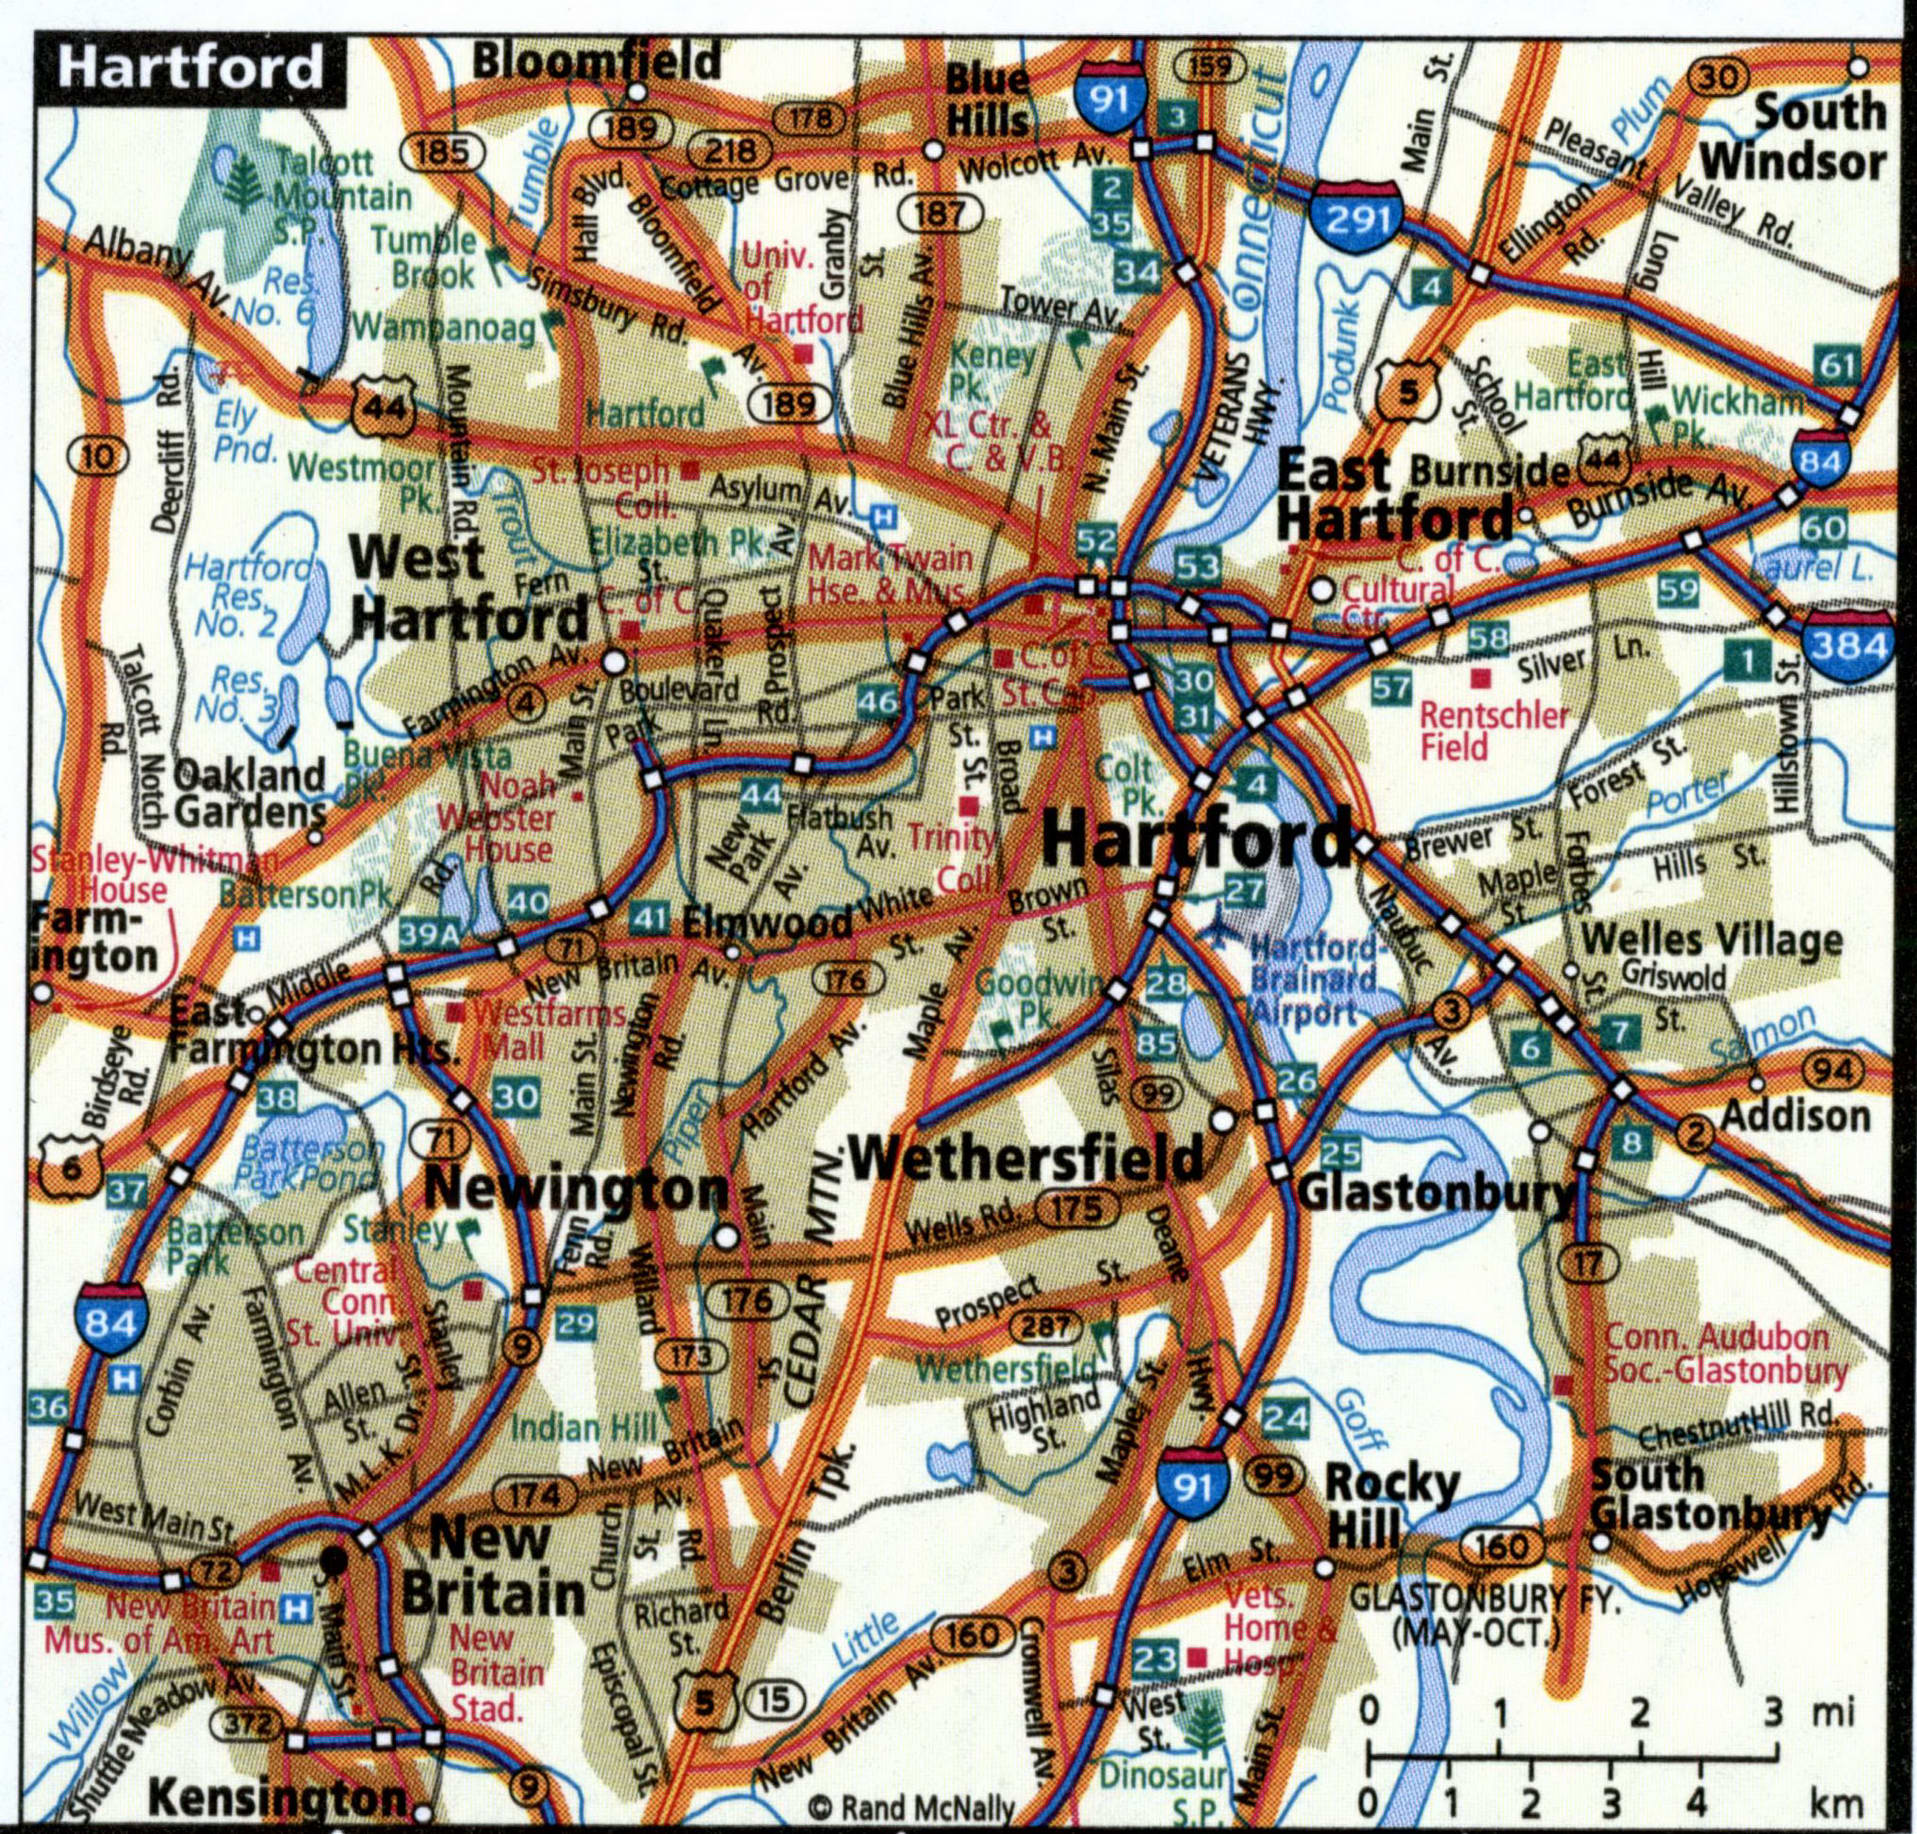 Hartford city map for truckers